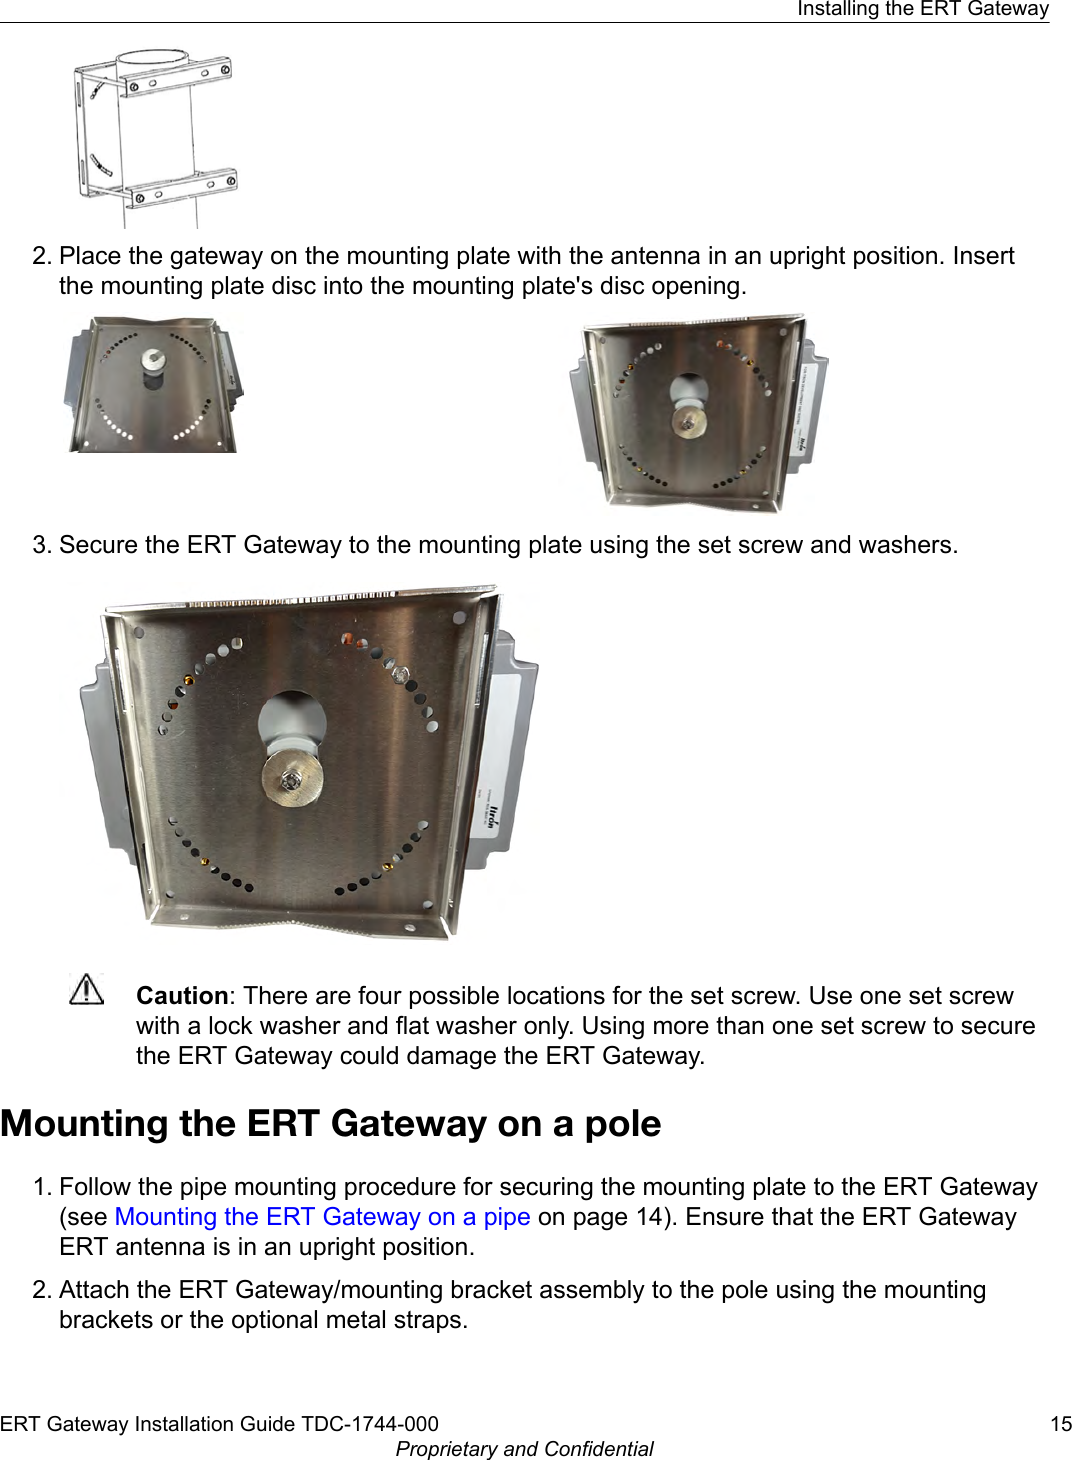 2. Place the gateway on the mounting plate with the antenna in an upright position. Insertthe mounting plate disc into the mounting plate&apos;s disc opening.3. Secure the ERT Gateway to the mounting plate using the set screw and washers.Caution: There are four possible locations for the set screw. Use one set screwwith a lock washer and flat washer only. Using more than one set screw to securethe ERT Gateway could damage the ERT Gateway.Mounting the ERT Gateway on a pole1. Follow the pipe mounting procedure for securing the mounting plate to the ERT Gateway(see Mounting the ERT Gateway on a pipe on page 14). Ensure that the ERT GatewayERT antenna is in an upright position.2. Attach the ERT Gateway/mounting bracket assembly to the pole using the mountingbrackets or the optional metal straps.Installing the ERT GatewayERT Gateway Installation Guide TDC-1744-000 15Proprietary and Confidential